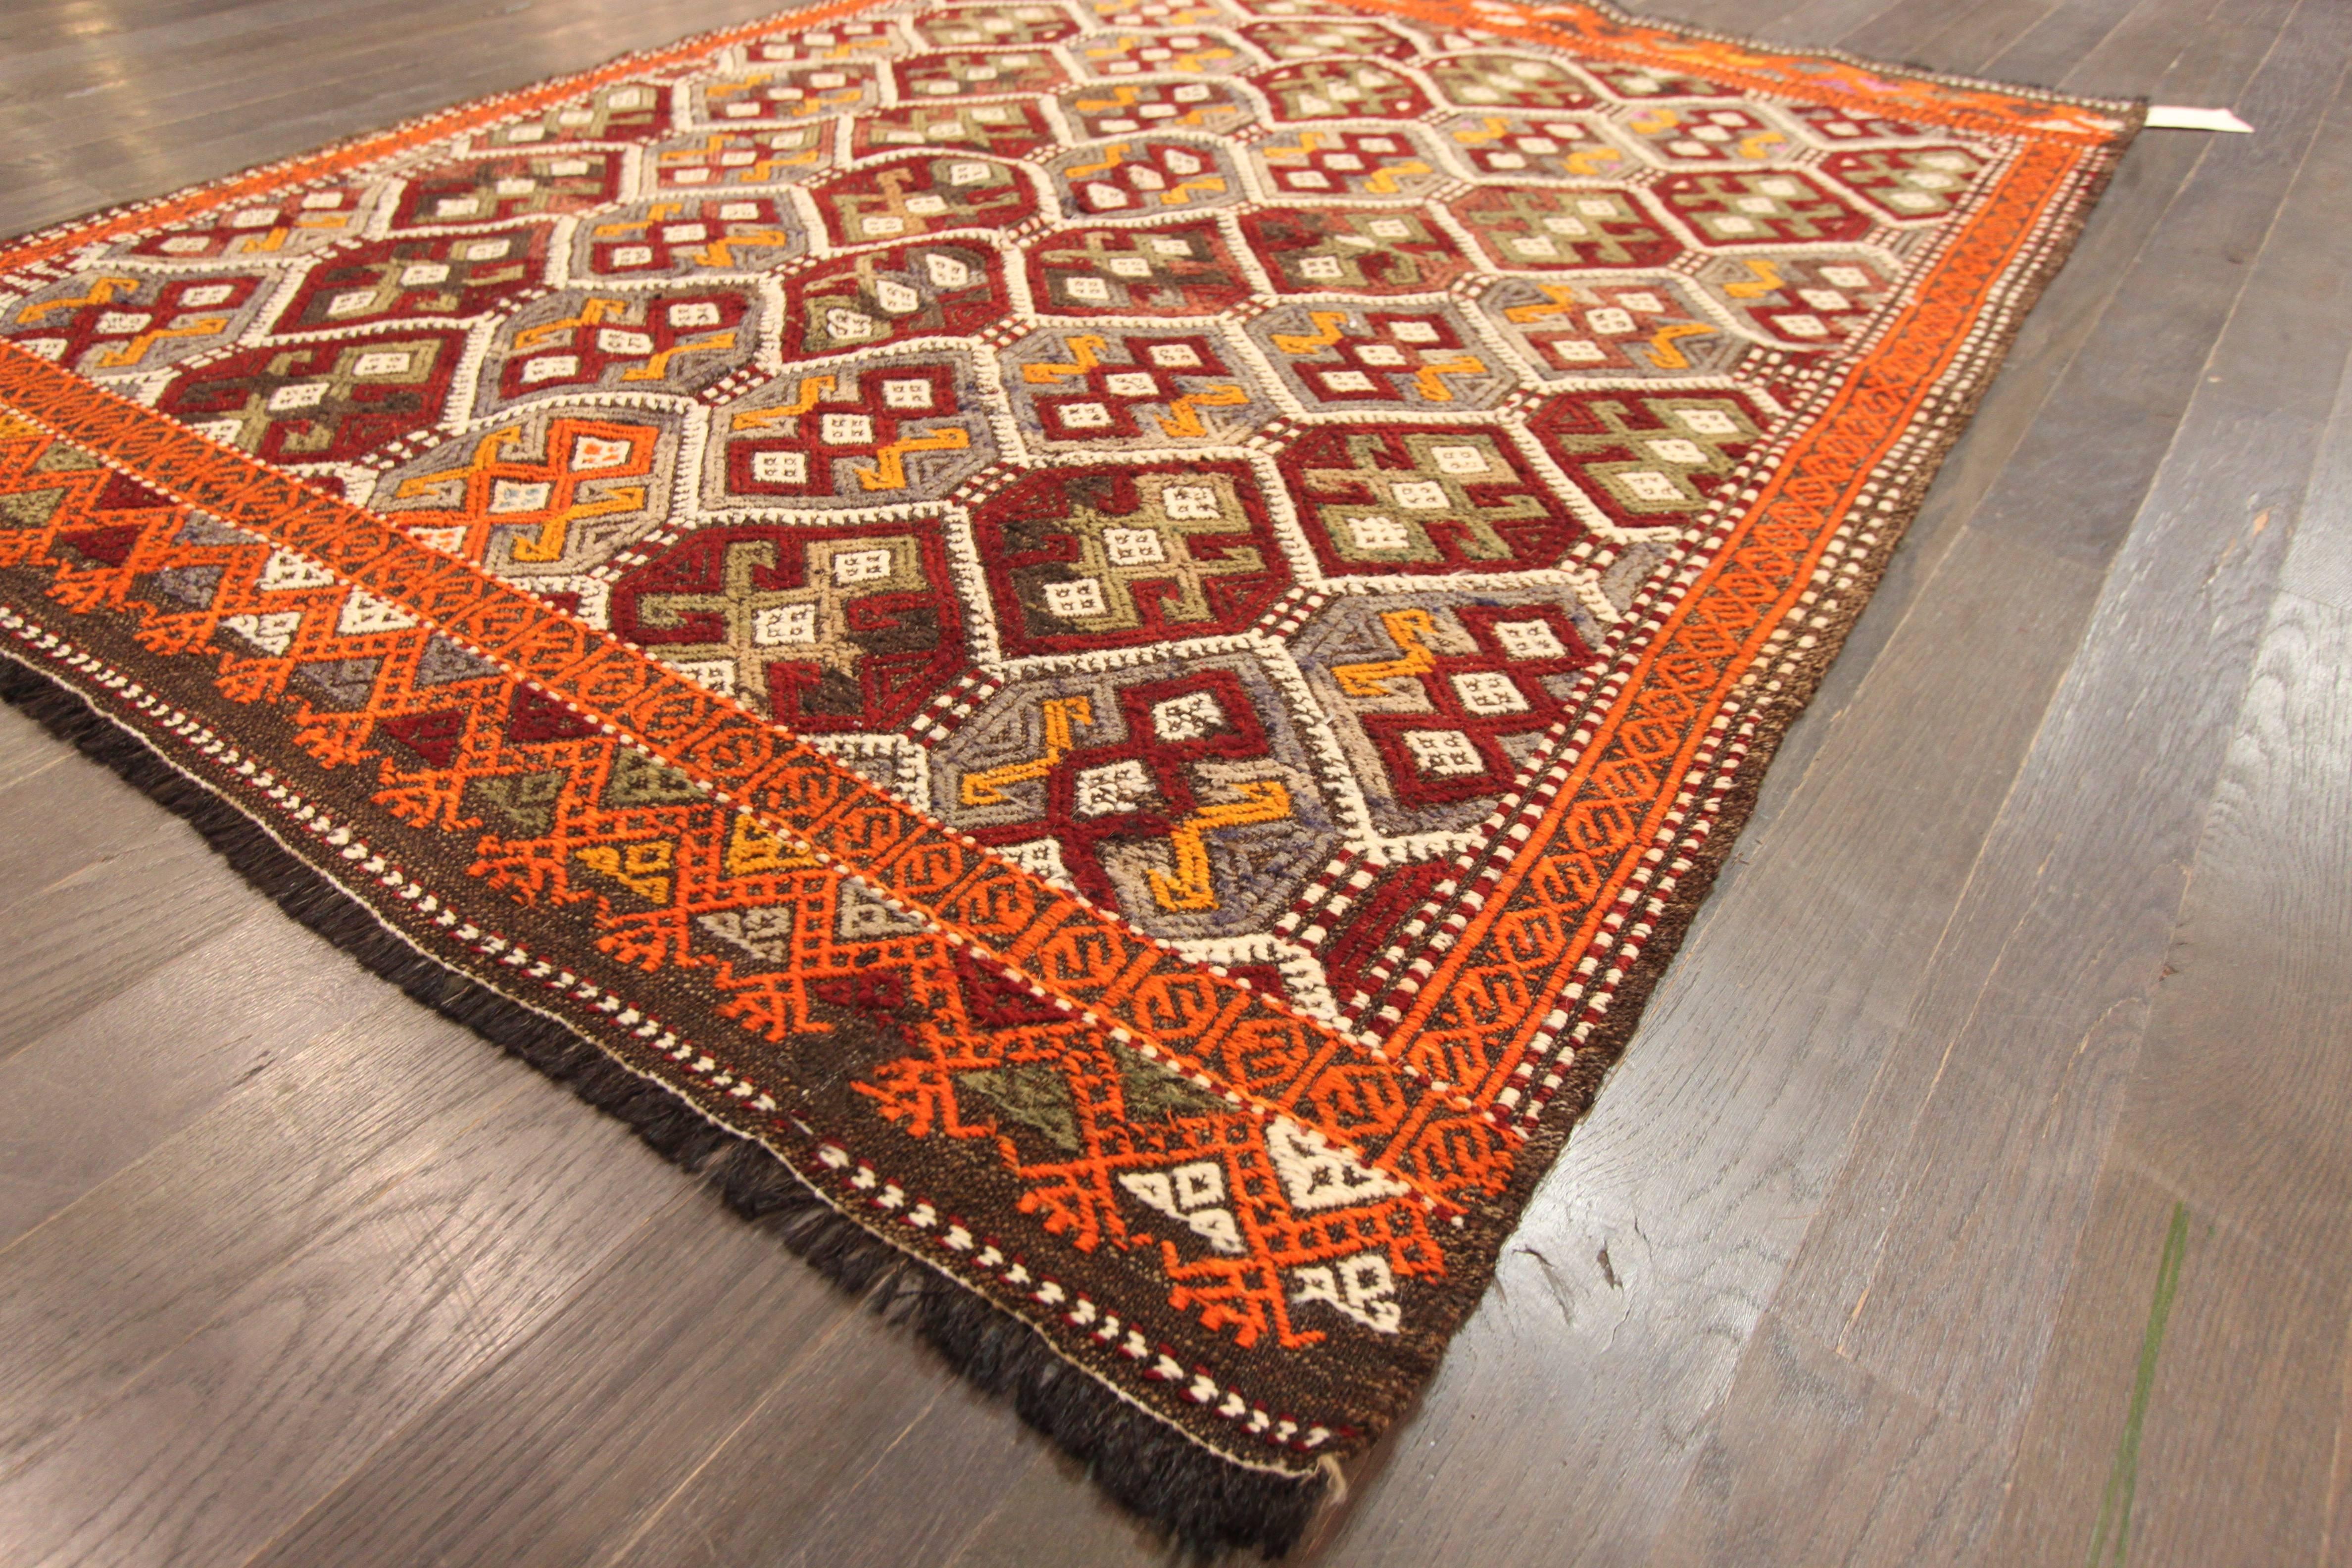 A hand-knotted Sumahk rug with a geometric pattern on a red field. Accents of orange, red and green throughout the piece. This rug measures 4'.6 x 5'.9.